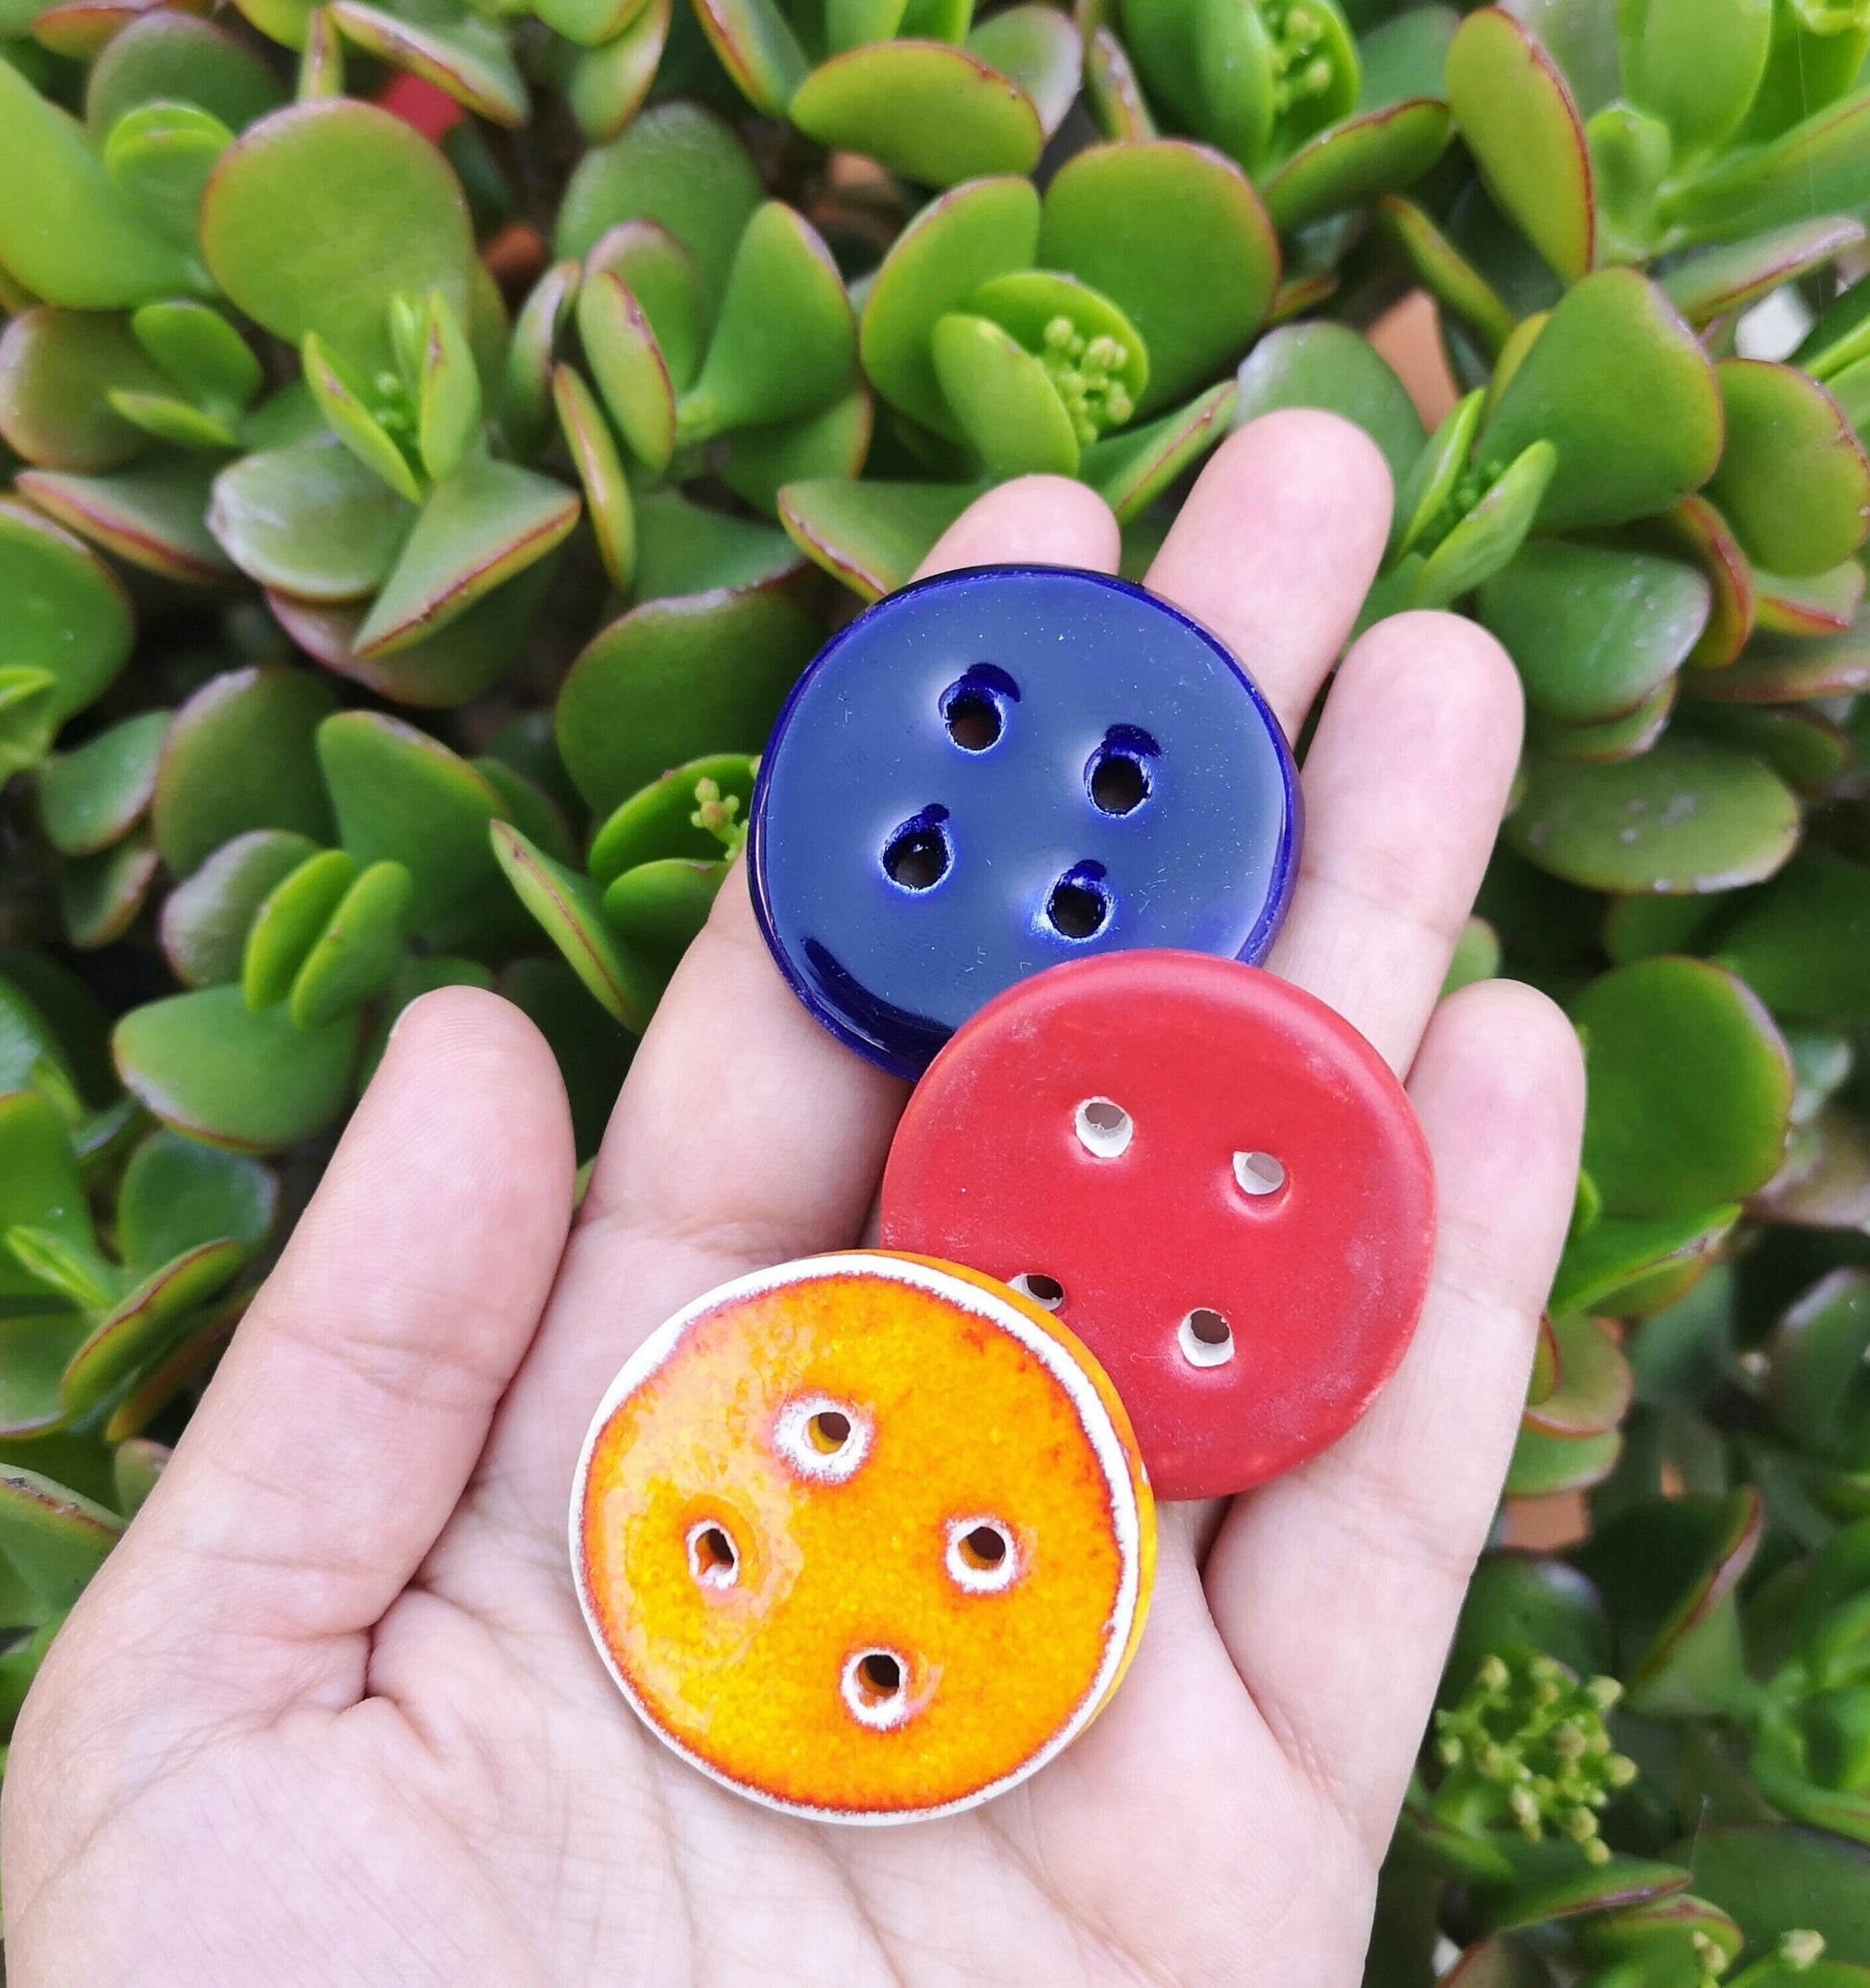 3Pcs Extra Large Buttons, 3 Pcs Handmade Ceramic Buttons, Sewing Supplies And Notions, Best Sellers Unique Flat Clay Buttons 4 Holes - Ceramica Ana Rafael